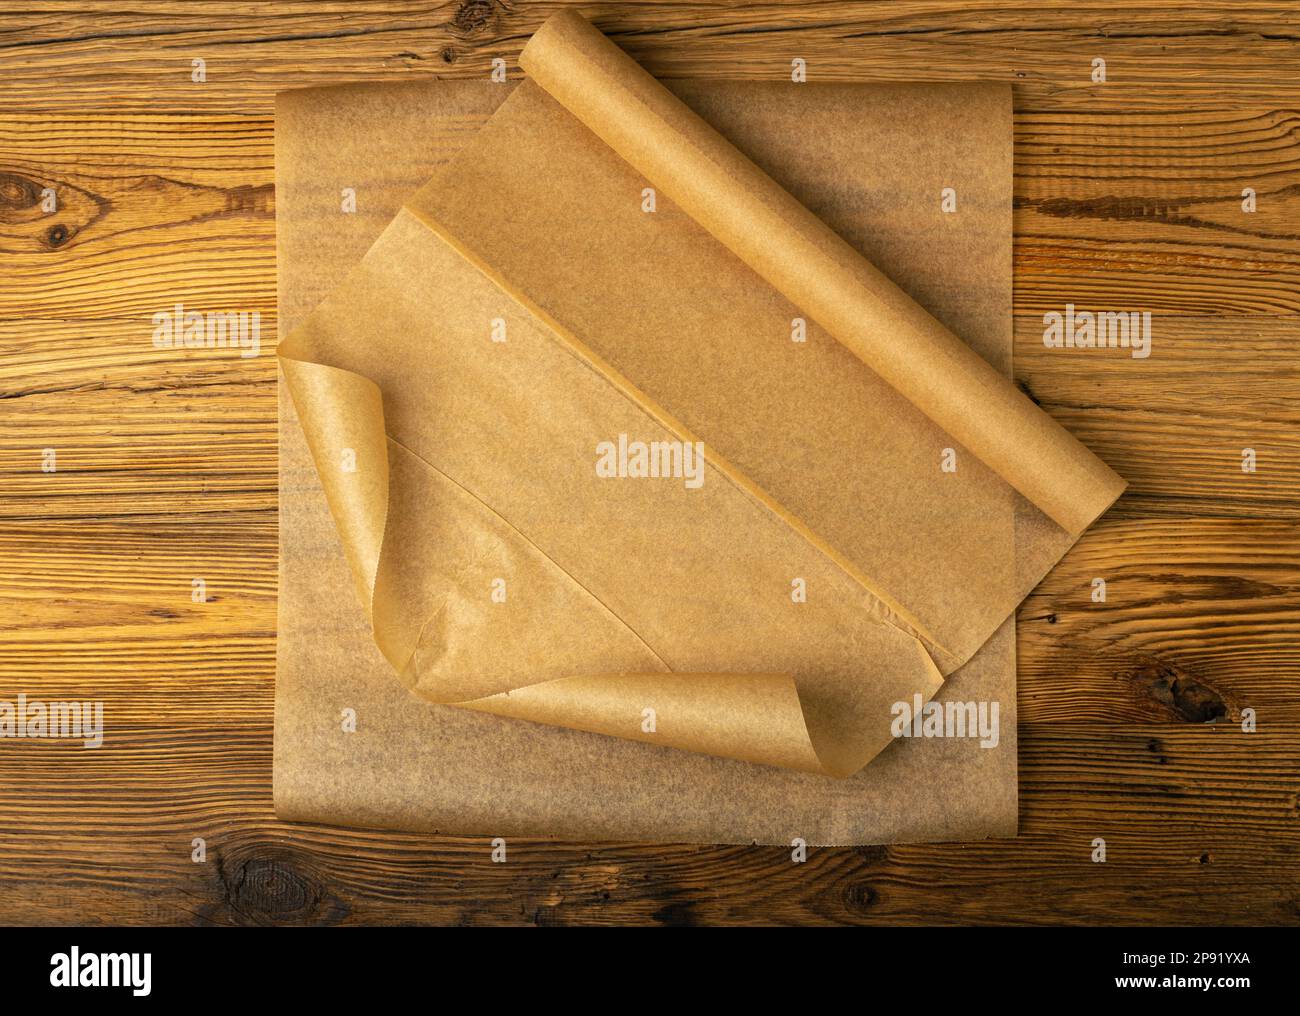 https://c8.alamy.com/comp/2P91YXA/brown-baking-paper-kraft-cooking-paper-sheet-texture-background-bakery-parchment-mockup-greaseproof-material-baking-paper-on-wood-background-top-v-2P91YXA.jpg